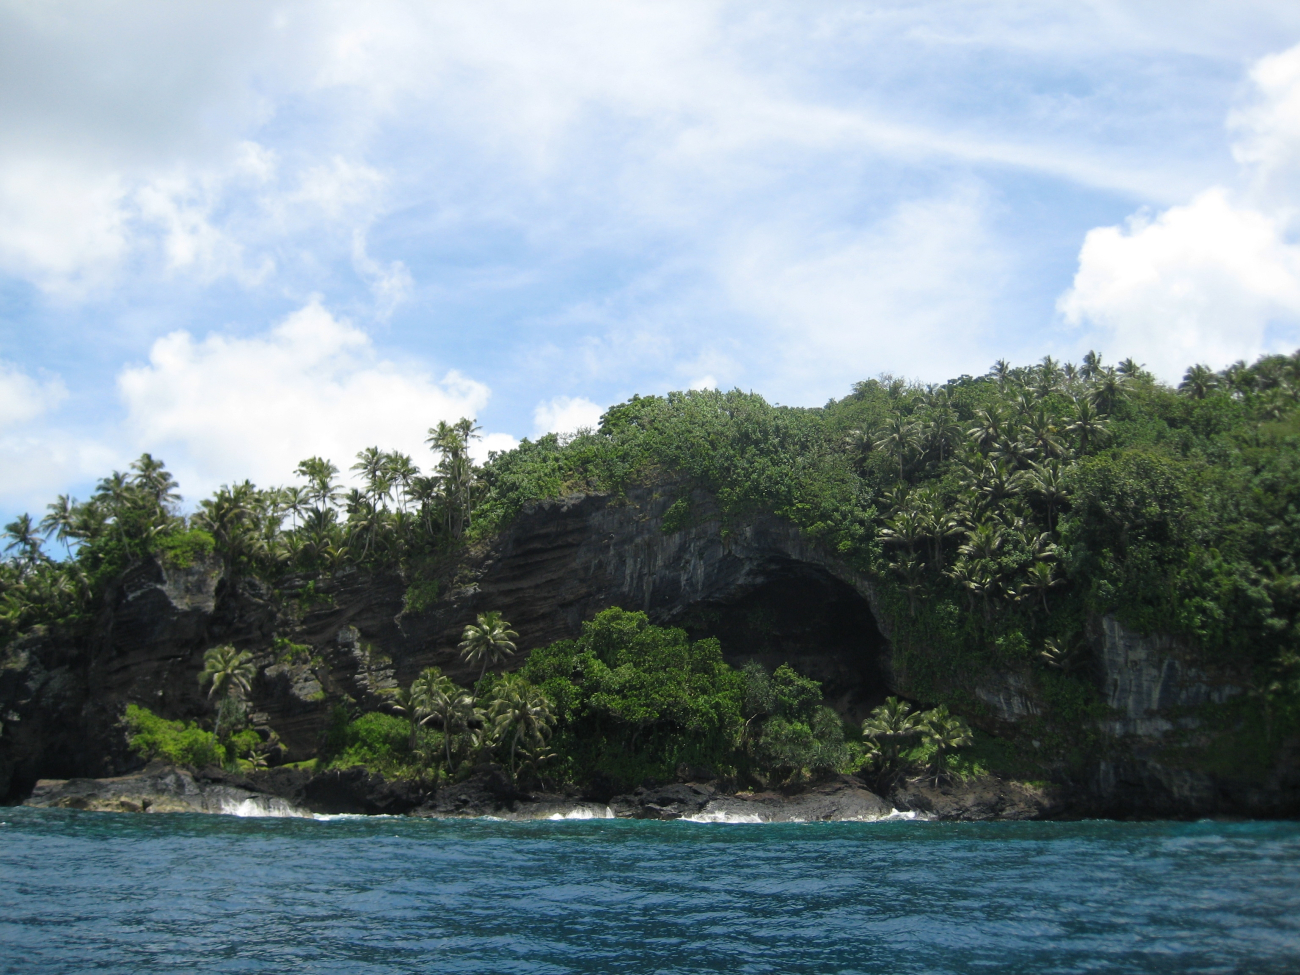 A large cave in the lava formation at Larsen's Bay